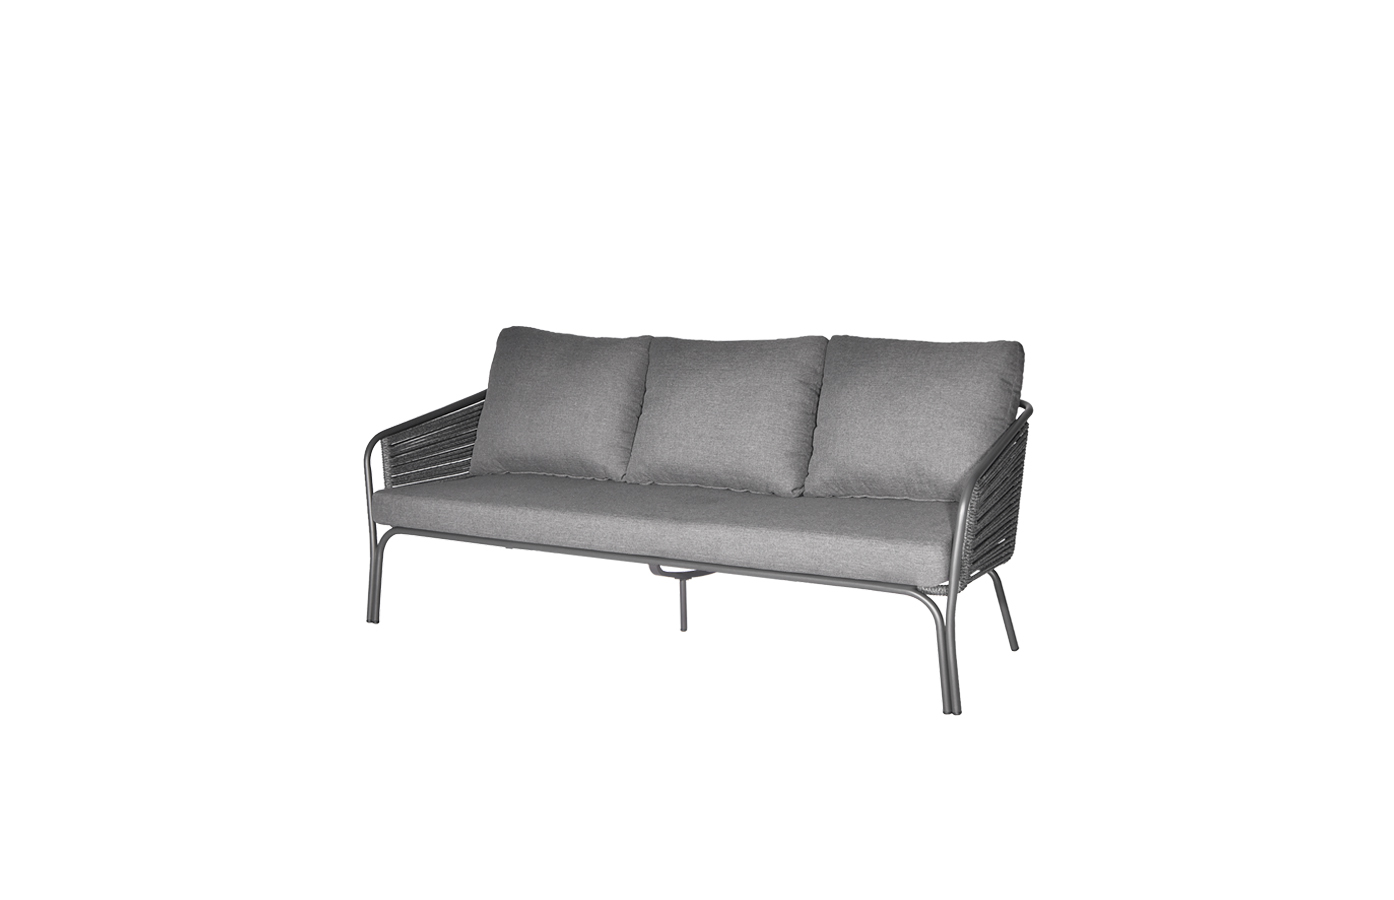 Nora 3-Seater Sofa Featured Image